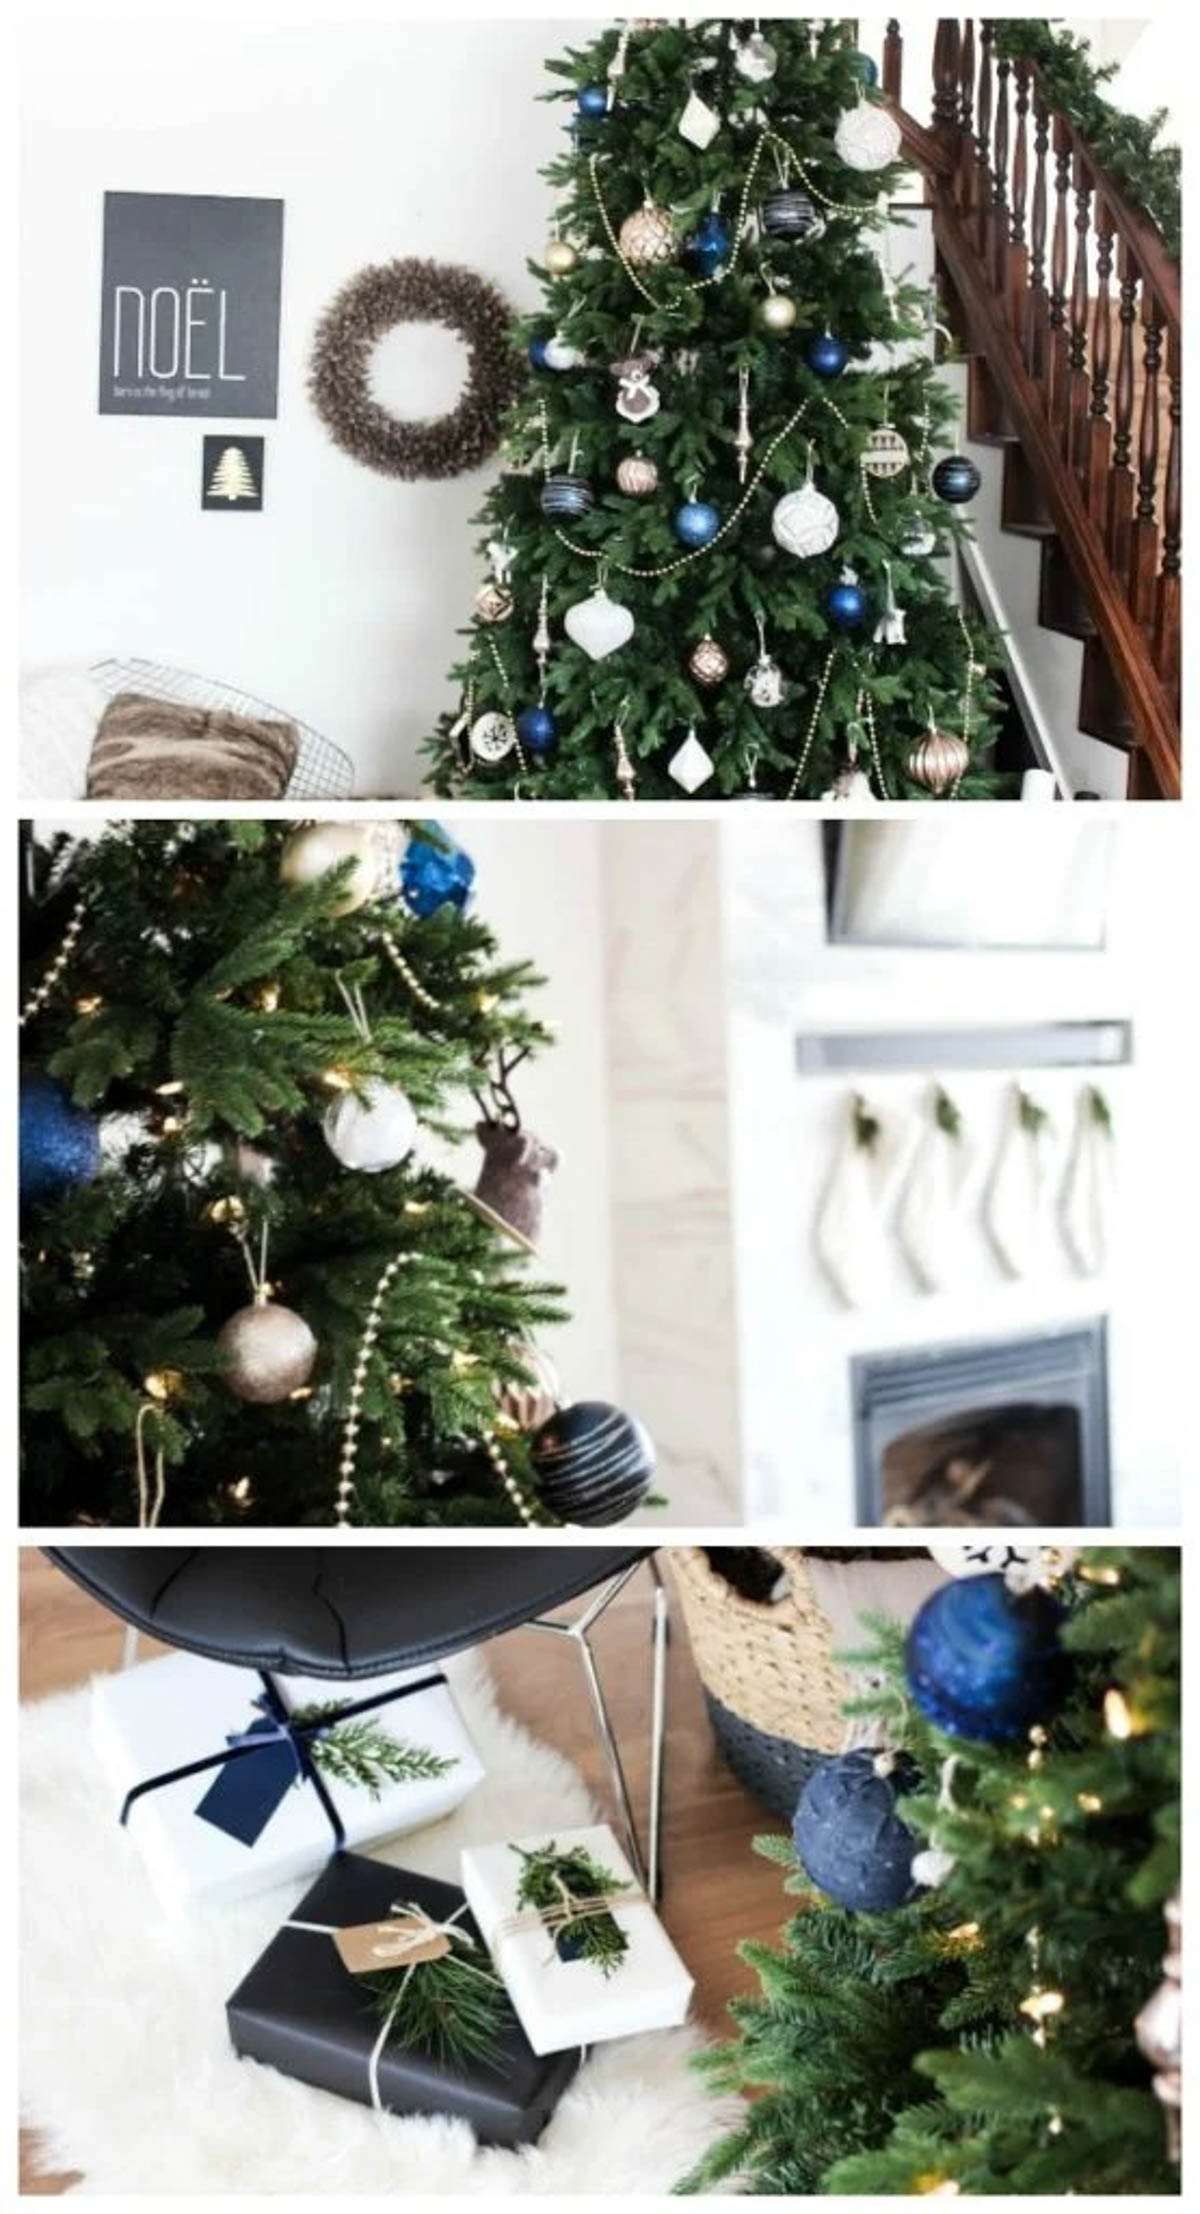 Image collage of a decorated designer Christmas tree.